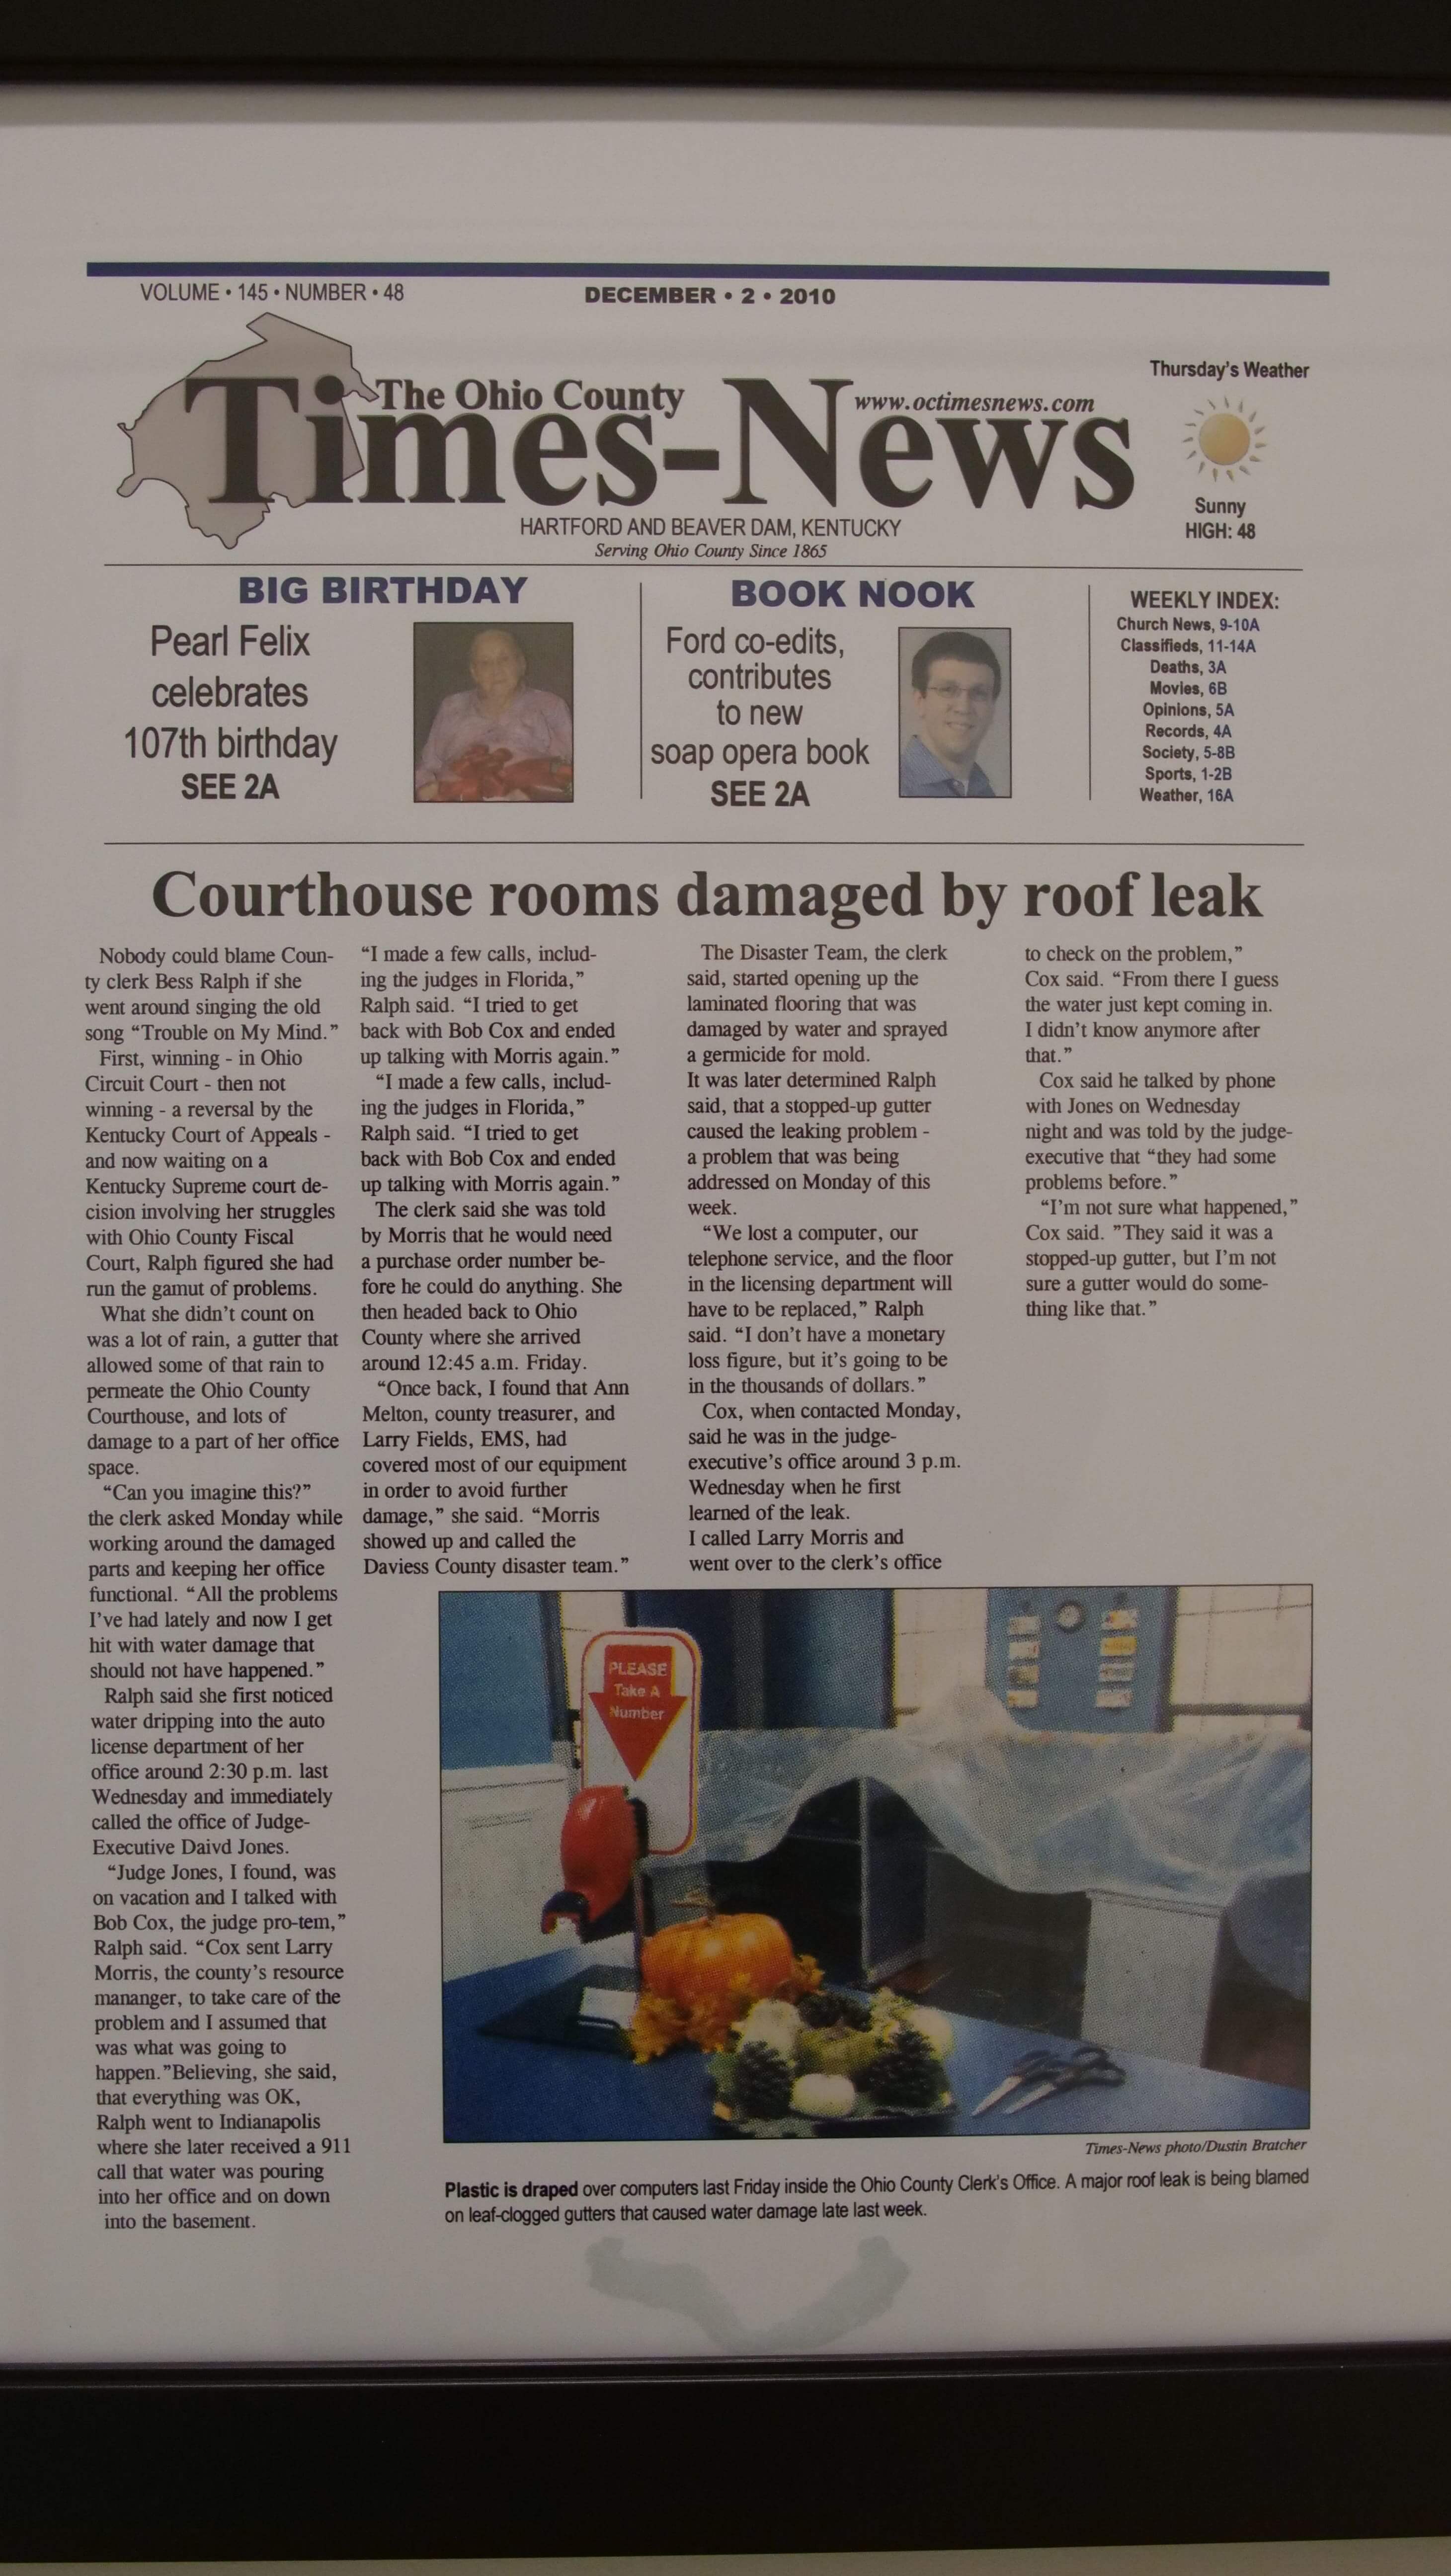 Newspaper showing courthouse rooms being damaged by roof leak